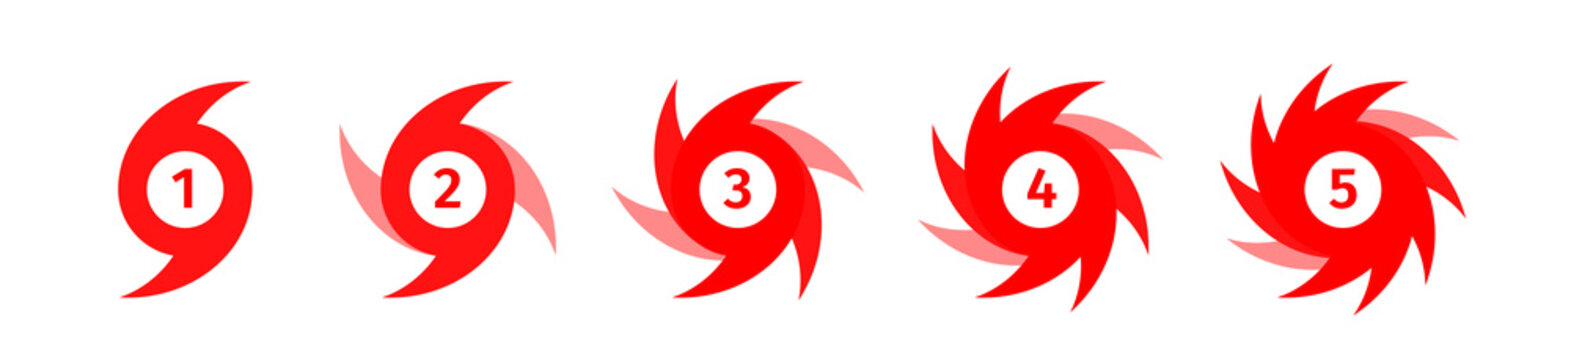 Vector illustration - set of hurricane scale indication icons. Symbolic display of wind force in a hurricane. Design of warning signs about the strength of a natural disaster